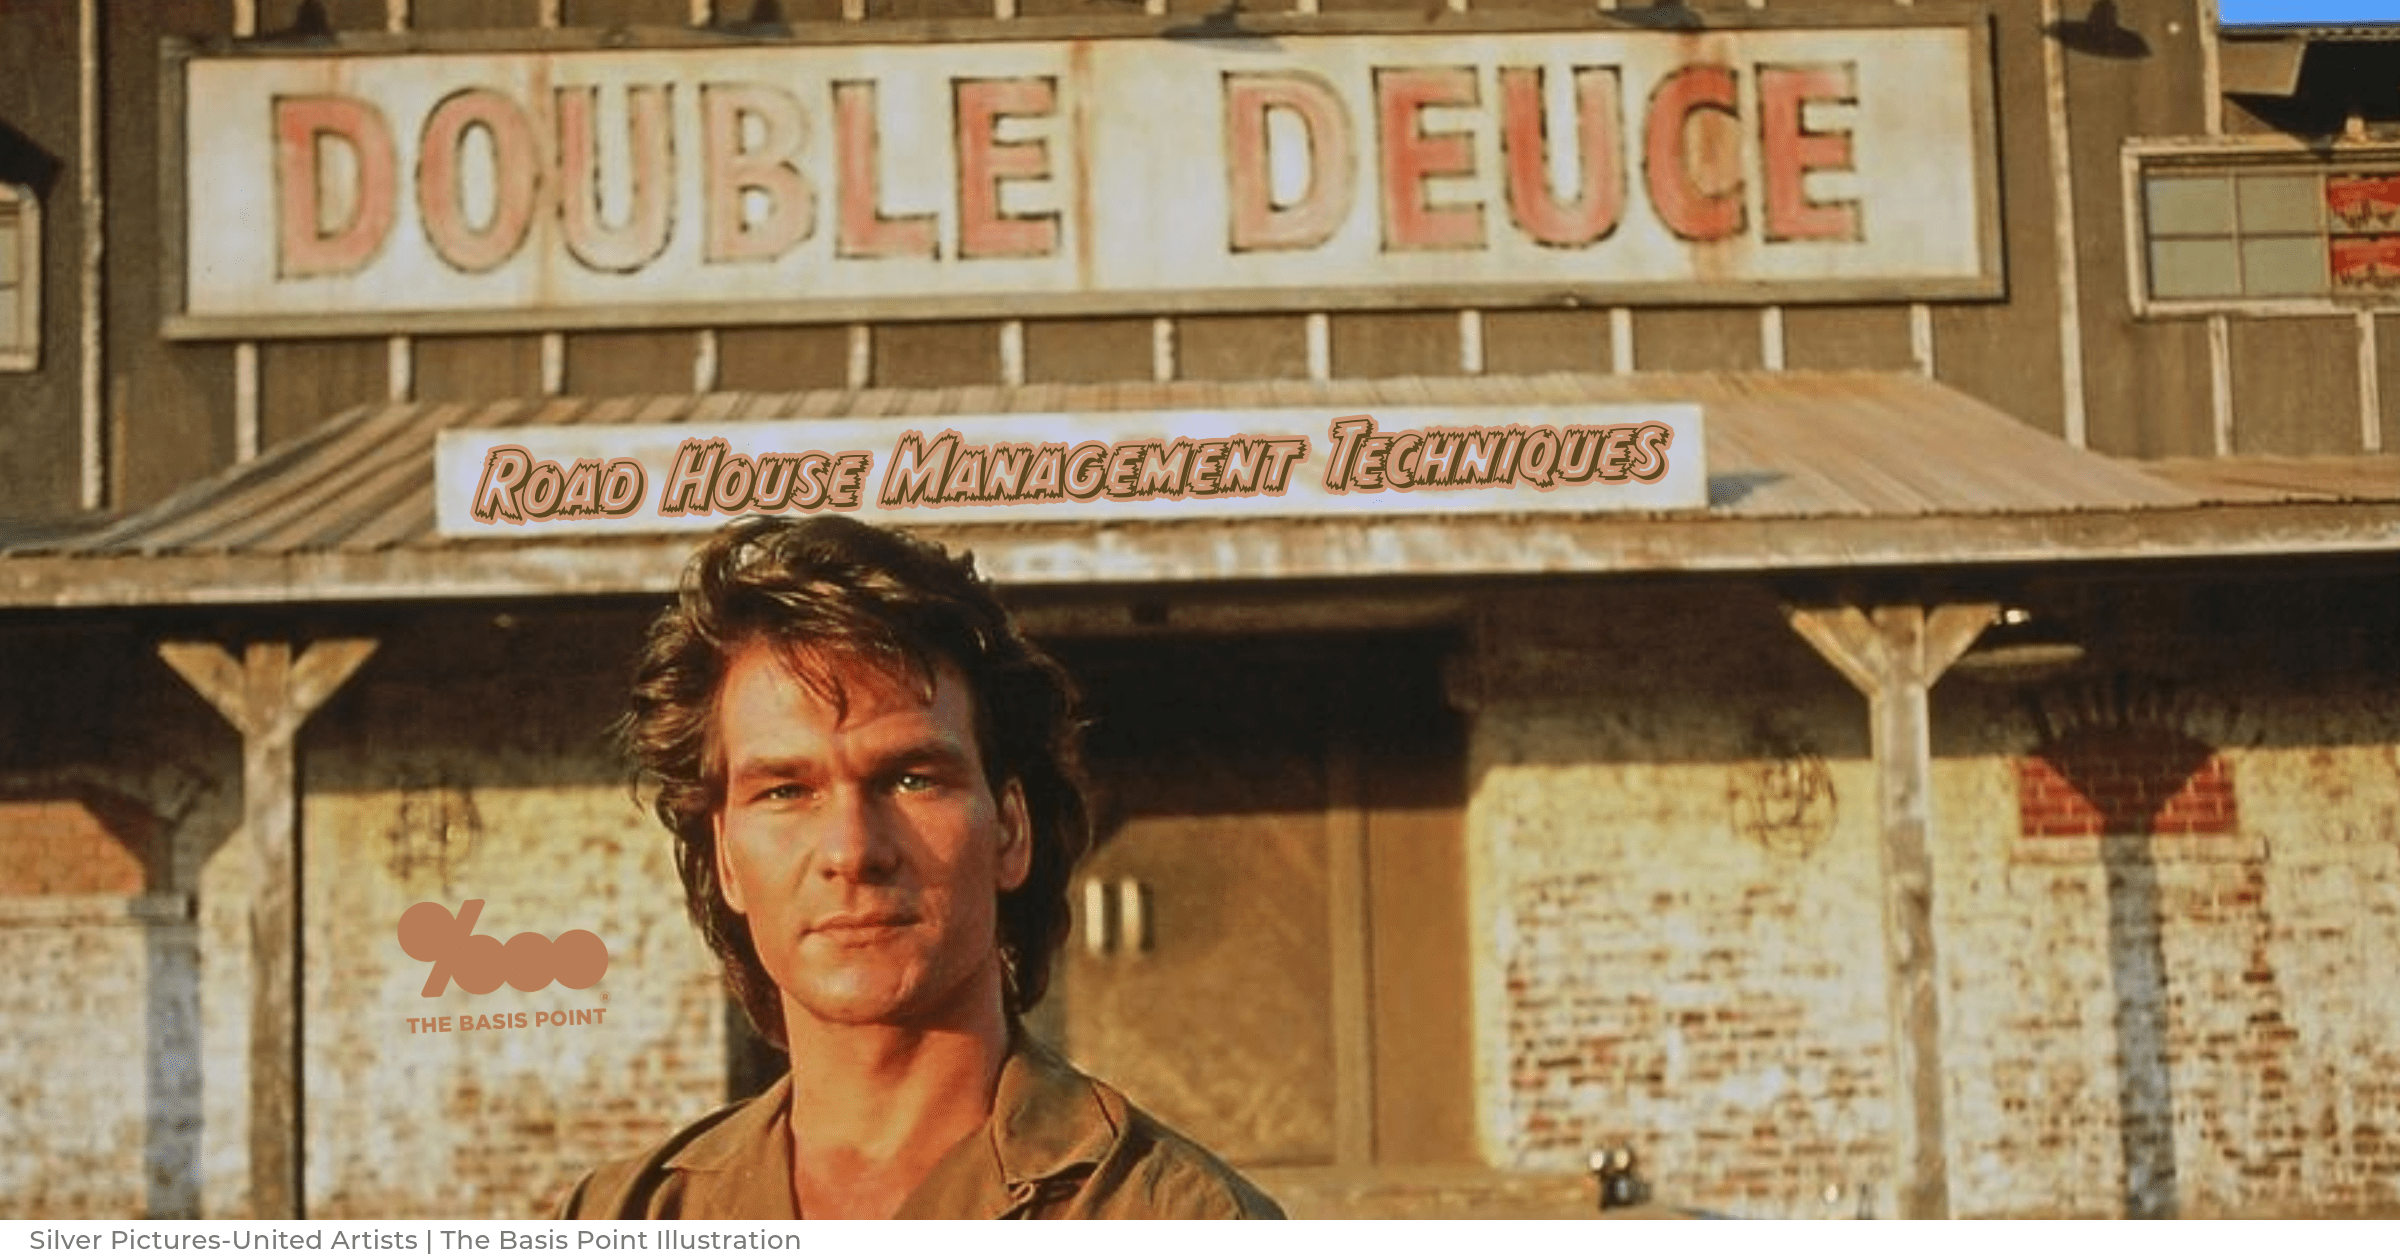 Road House Management Techniques I Learned Watching Dalton (Swayze) In Road House 2 - The Basis Point